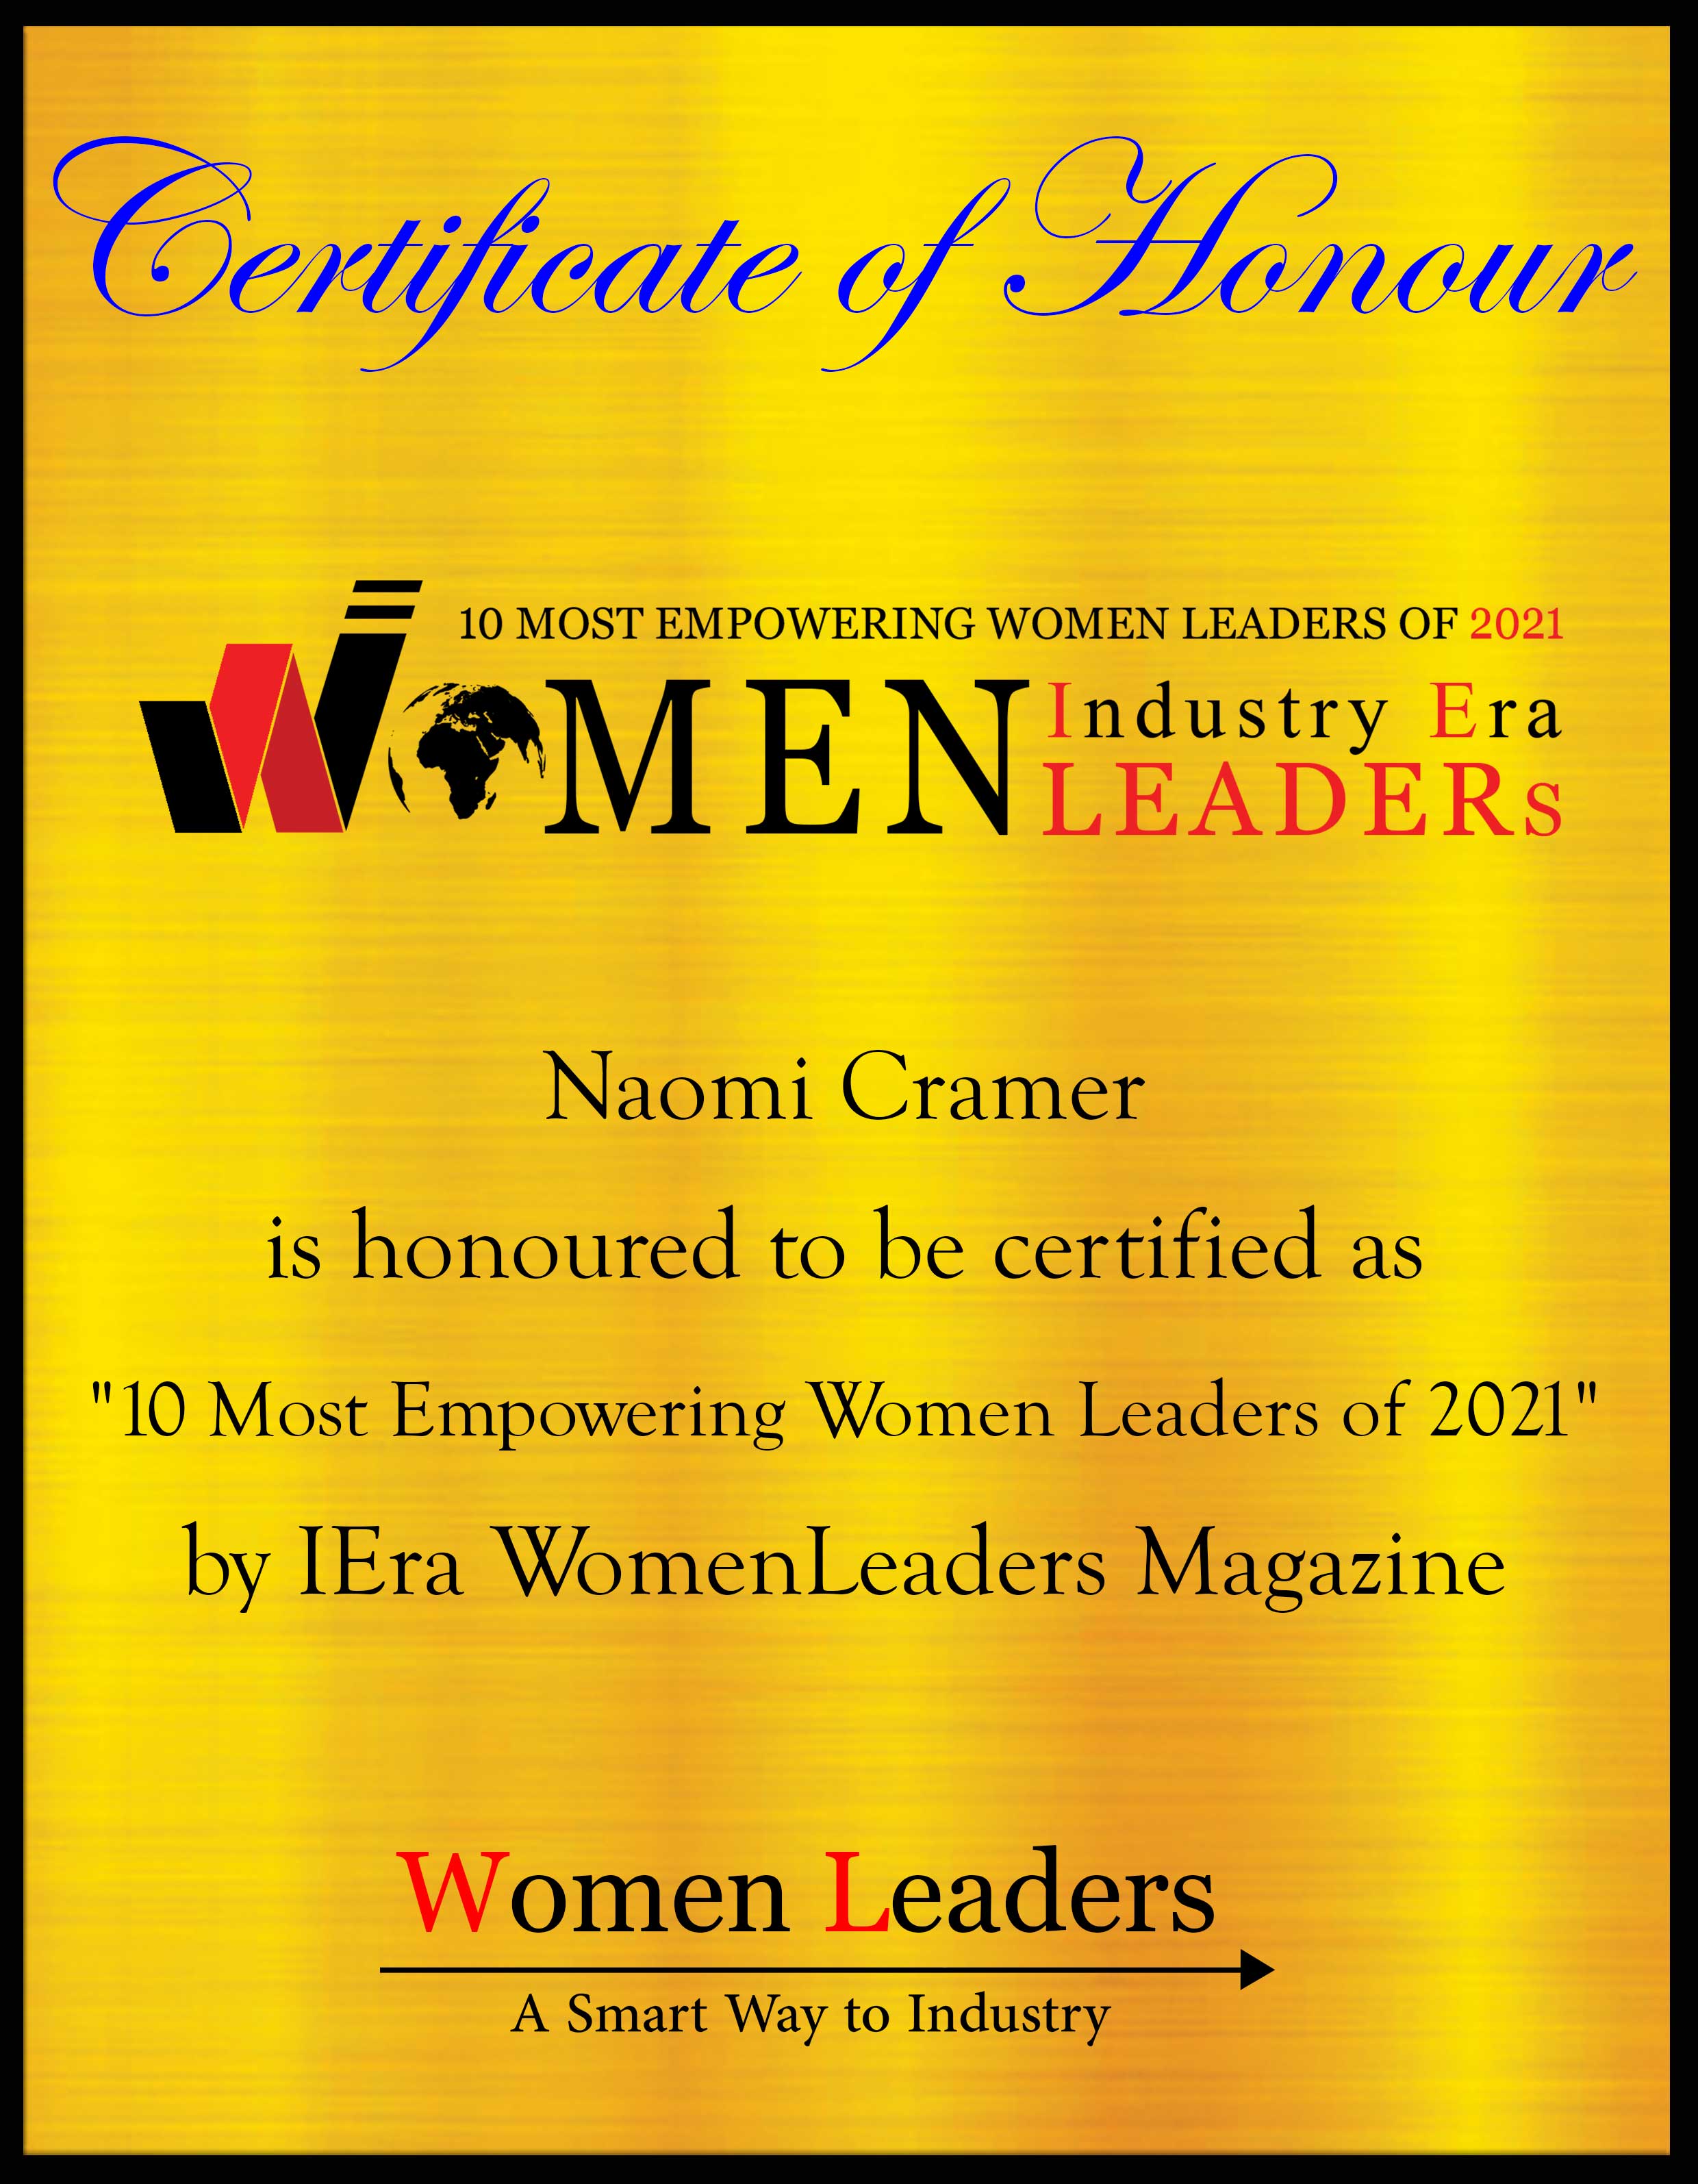 Naomi Cramer, Senior Human Resources Executive of Banner Health, Most Empowering Women Leaders of 2021